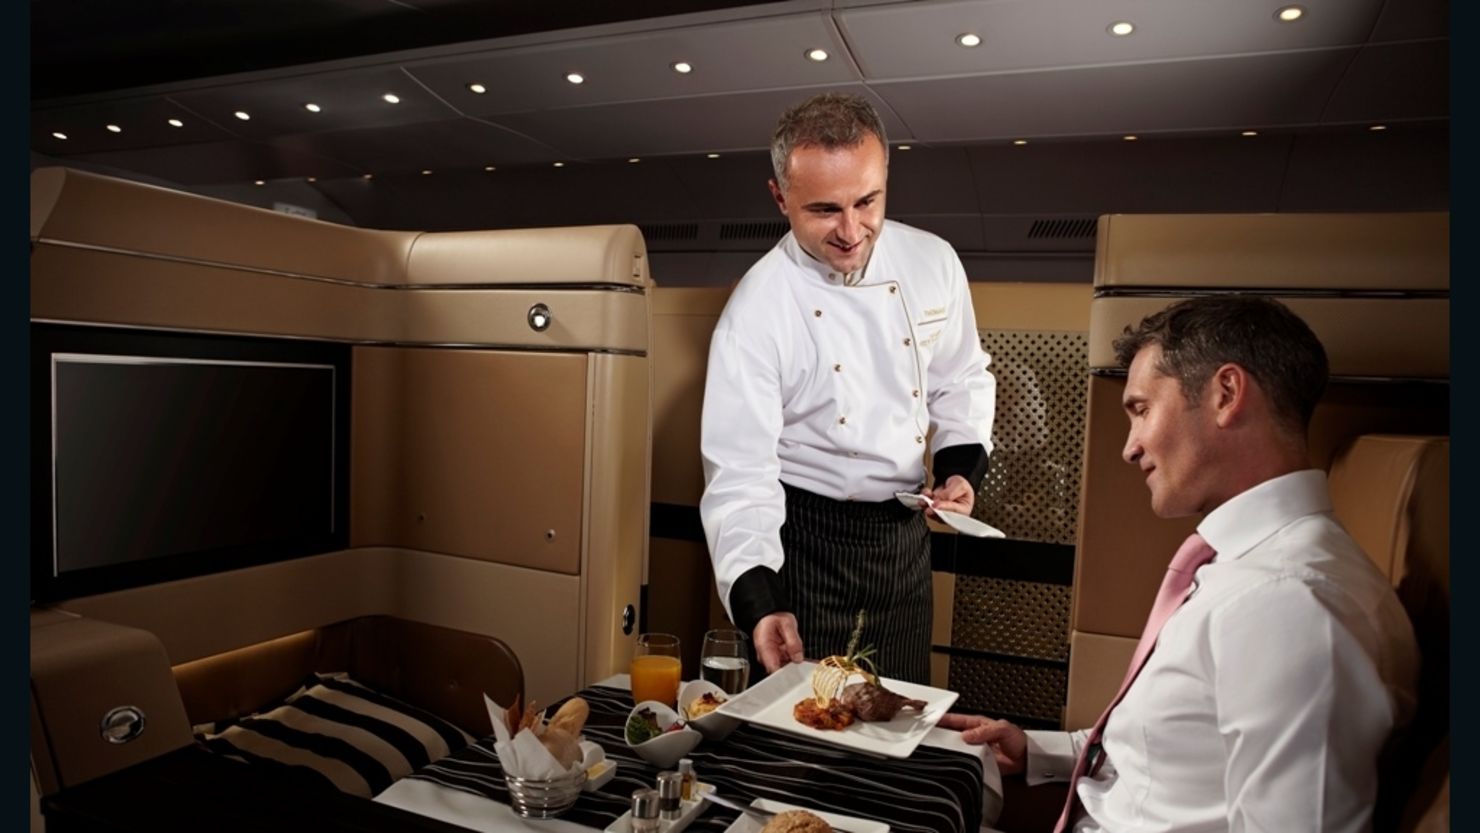 An Etihad Airways chef serves up an in-flight meal to a passenger in the first-class cabin.